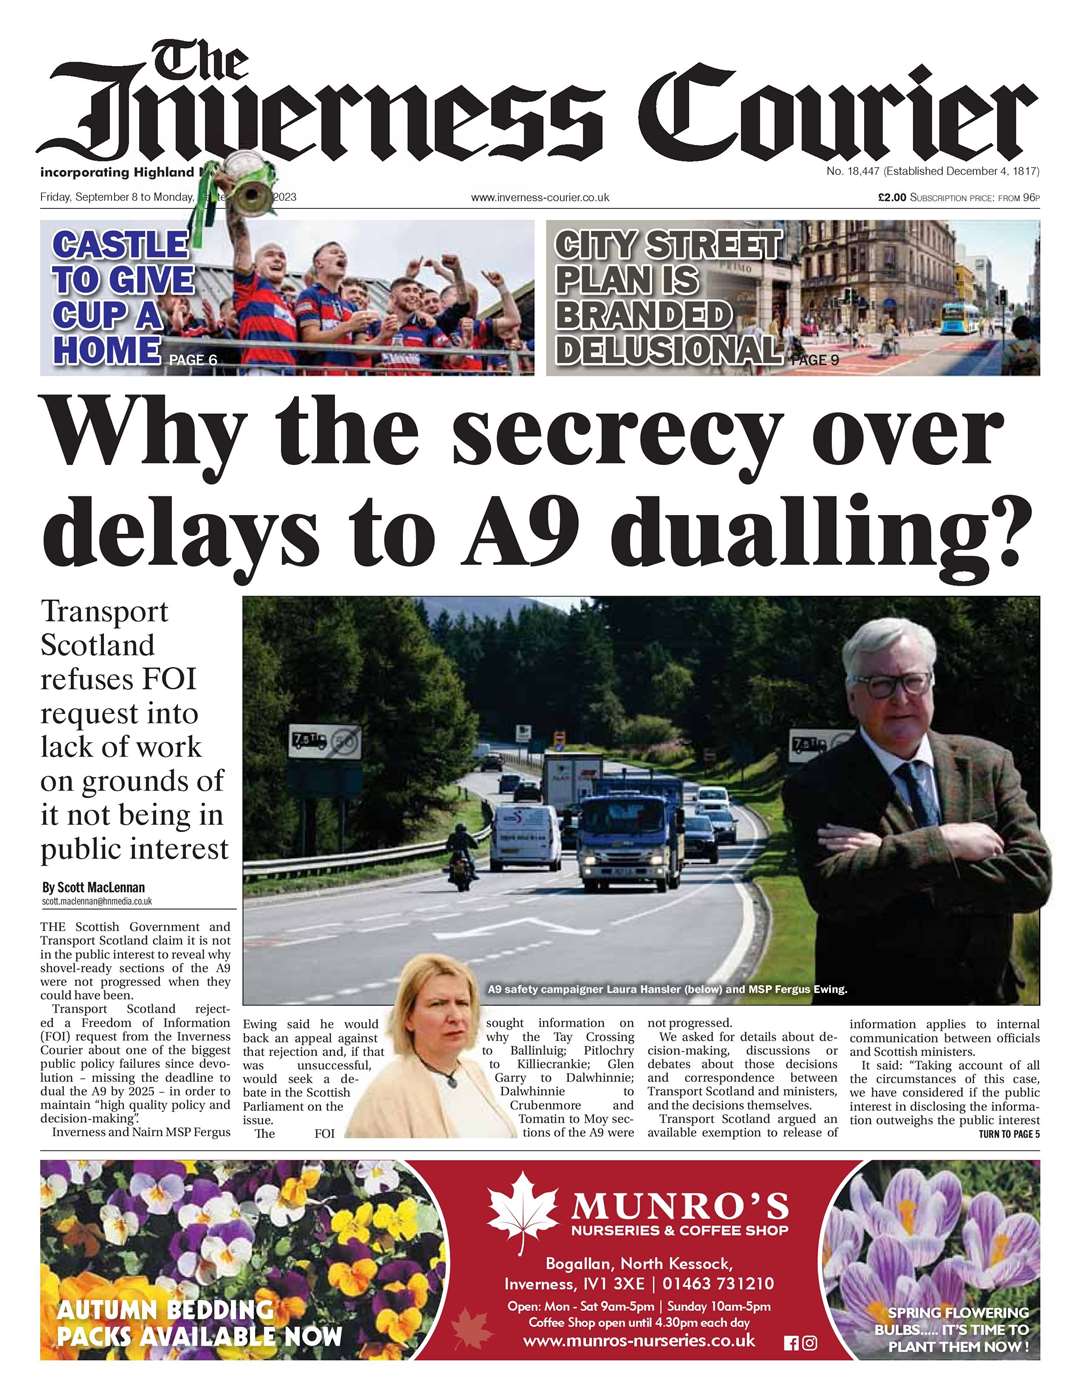 The Inverness Courier, September 8, front page.